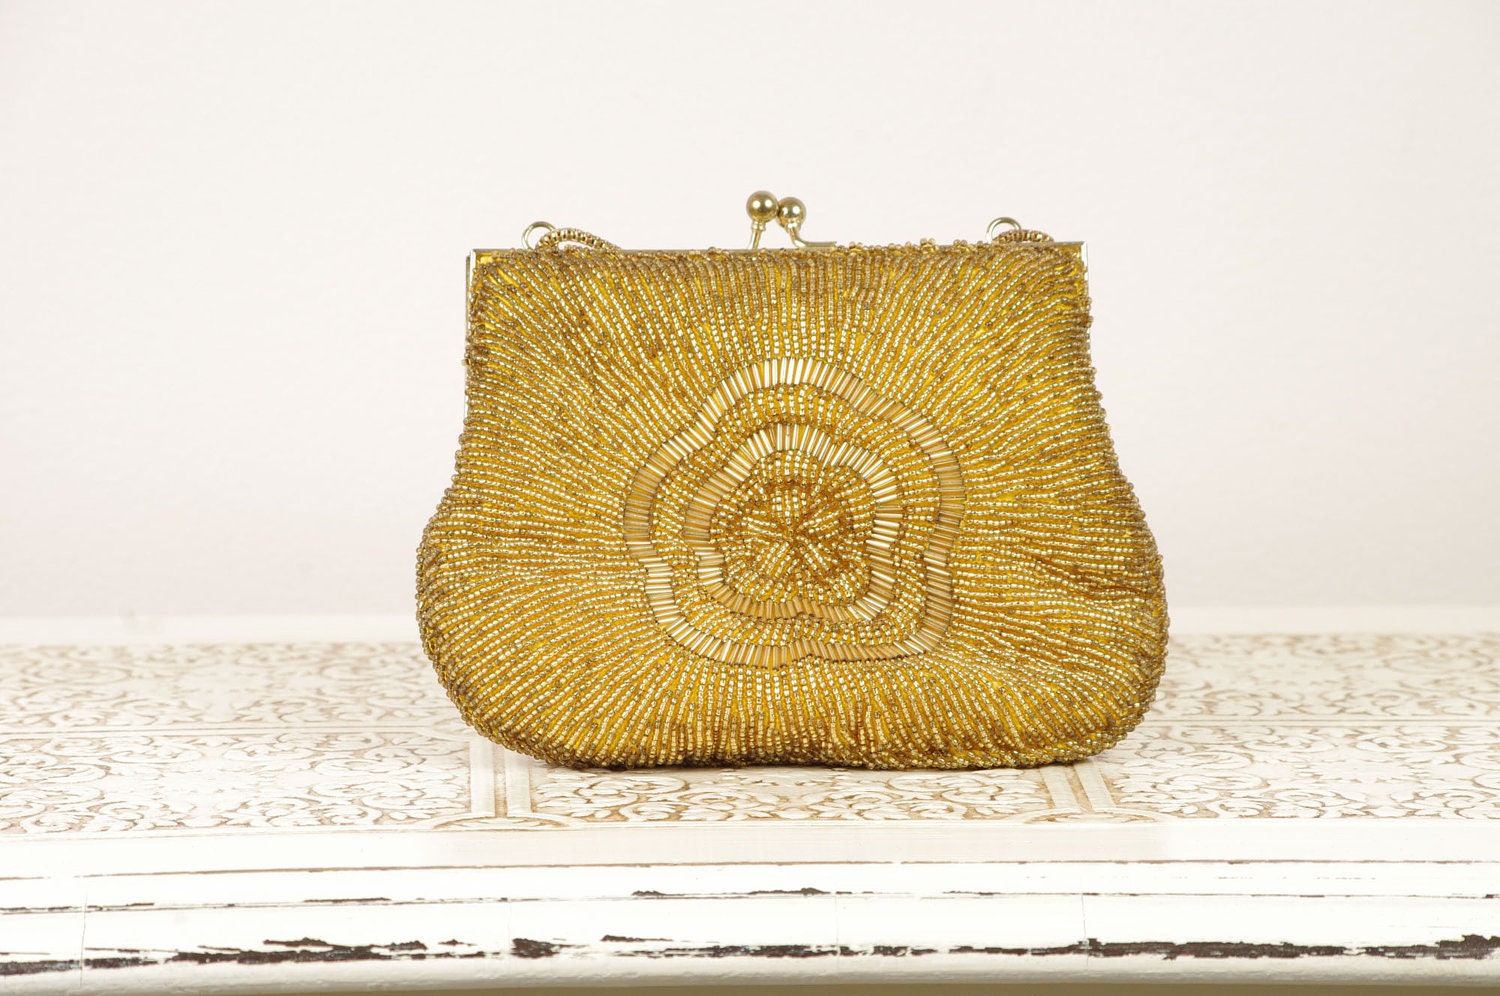 Vintage Gold Evening Bag Clutch - Beaded Purse - Made in Hong Kong by La Regale - DuryeaPlaceDesigns